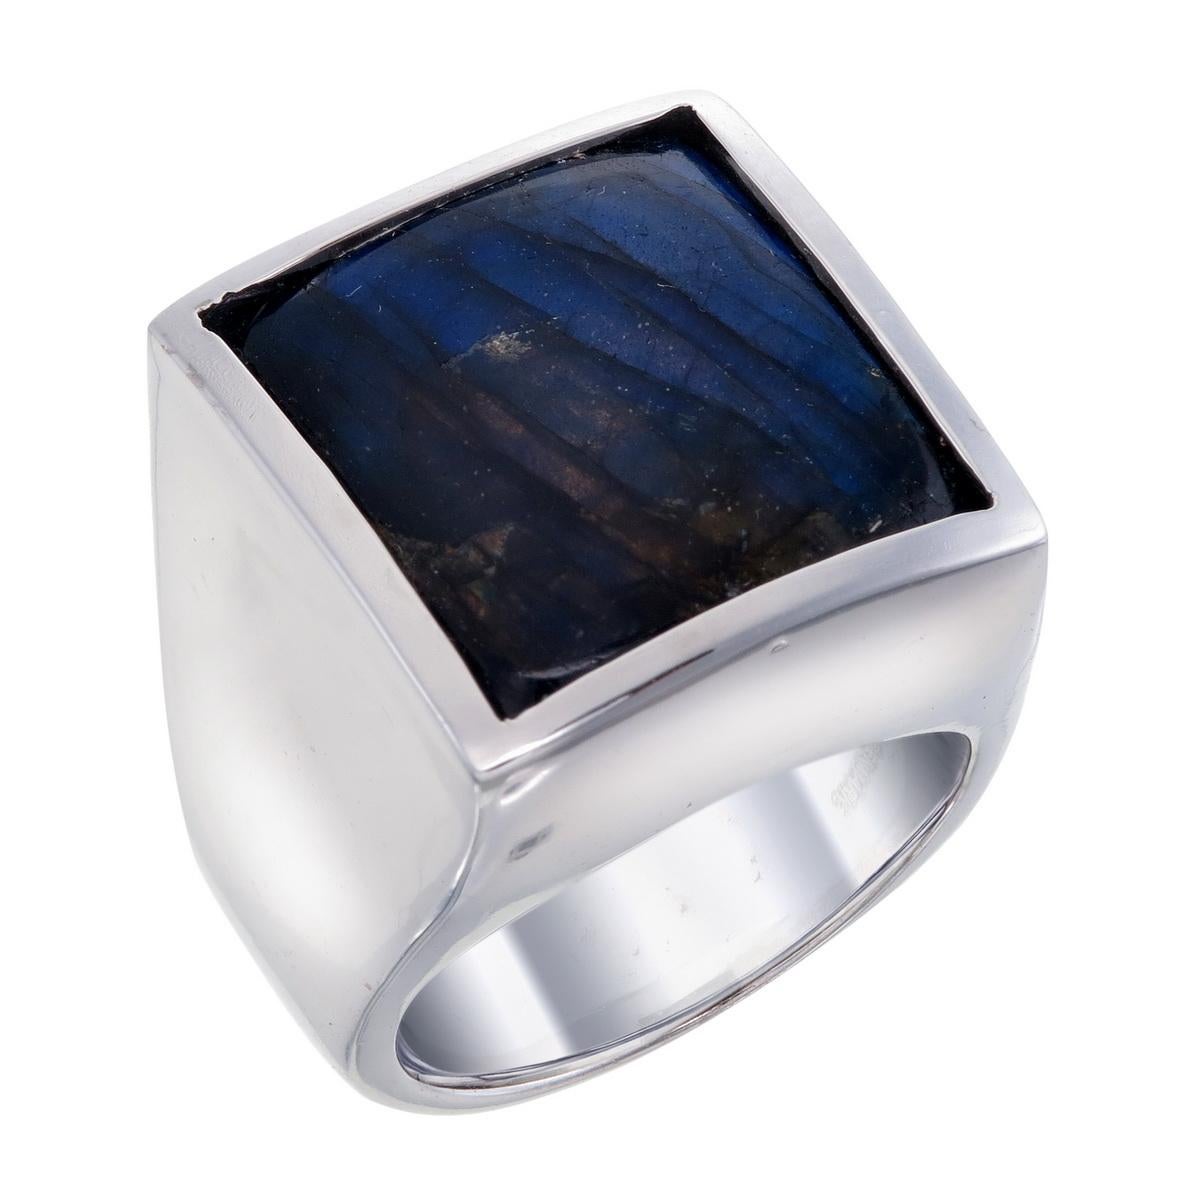 Orloff of Denmark; 17.38 carat Sculpture ring fashioned out of 925 Sterling Silver.

Discover a captivating symphony of color and intrigue in this sterling silver ring adorned with a remarkable 17 carat labradorite gem. With every movement, this